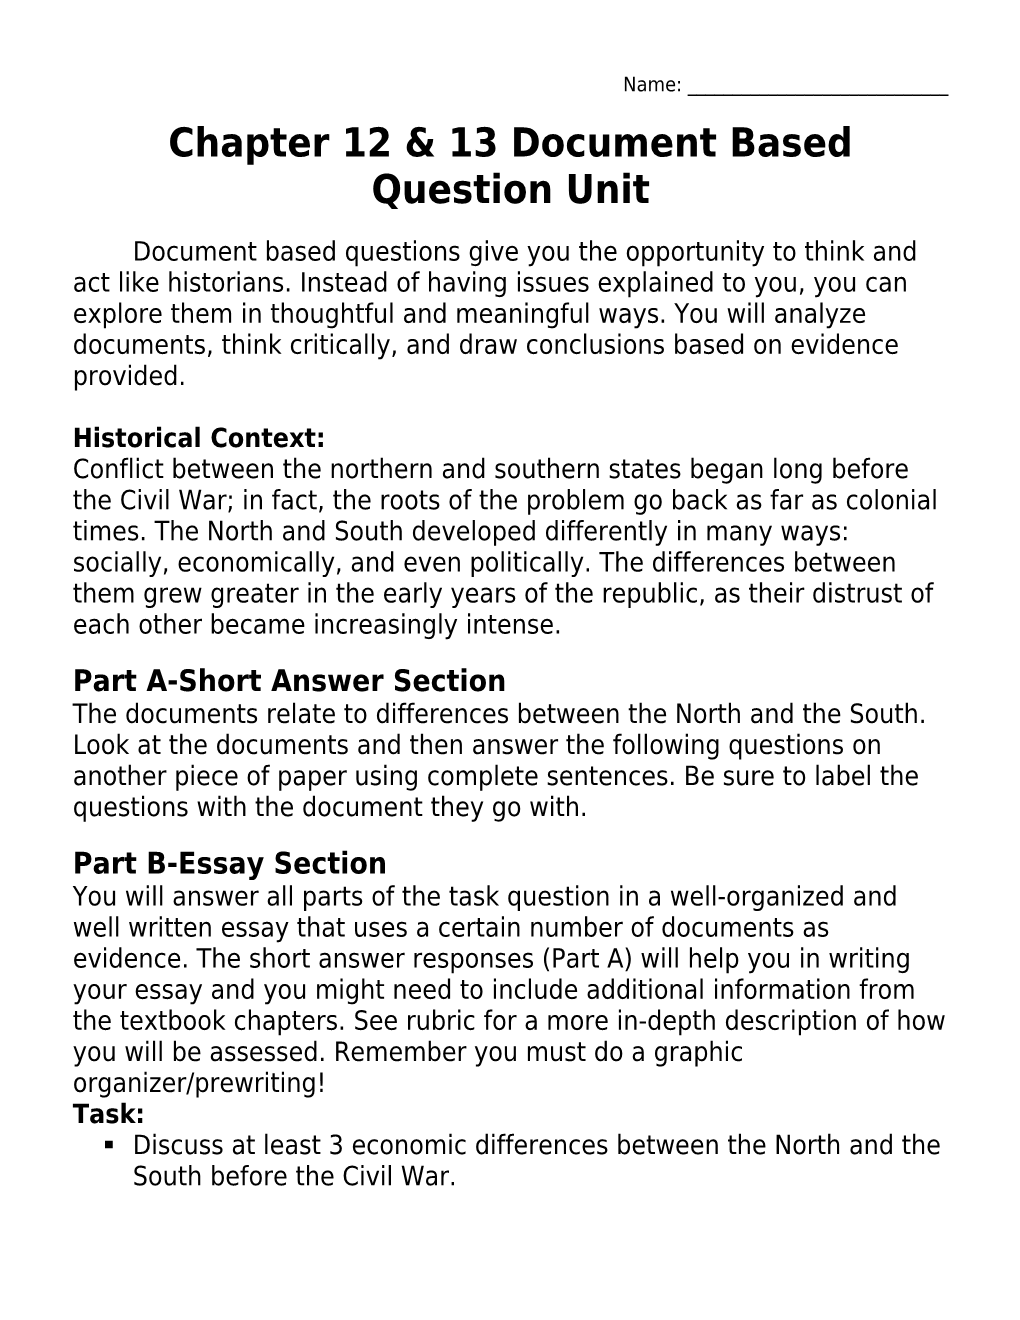 Chapter 12 & 13 Document Based Question Unit